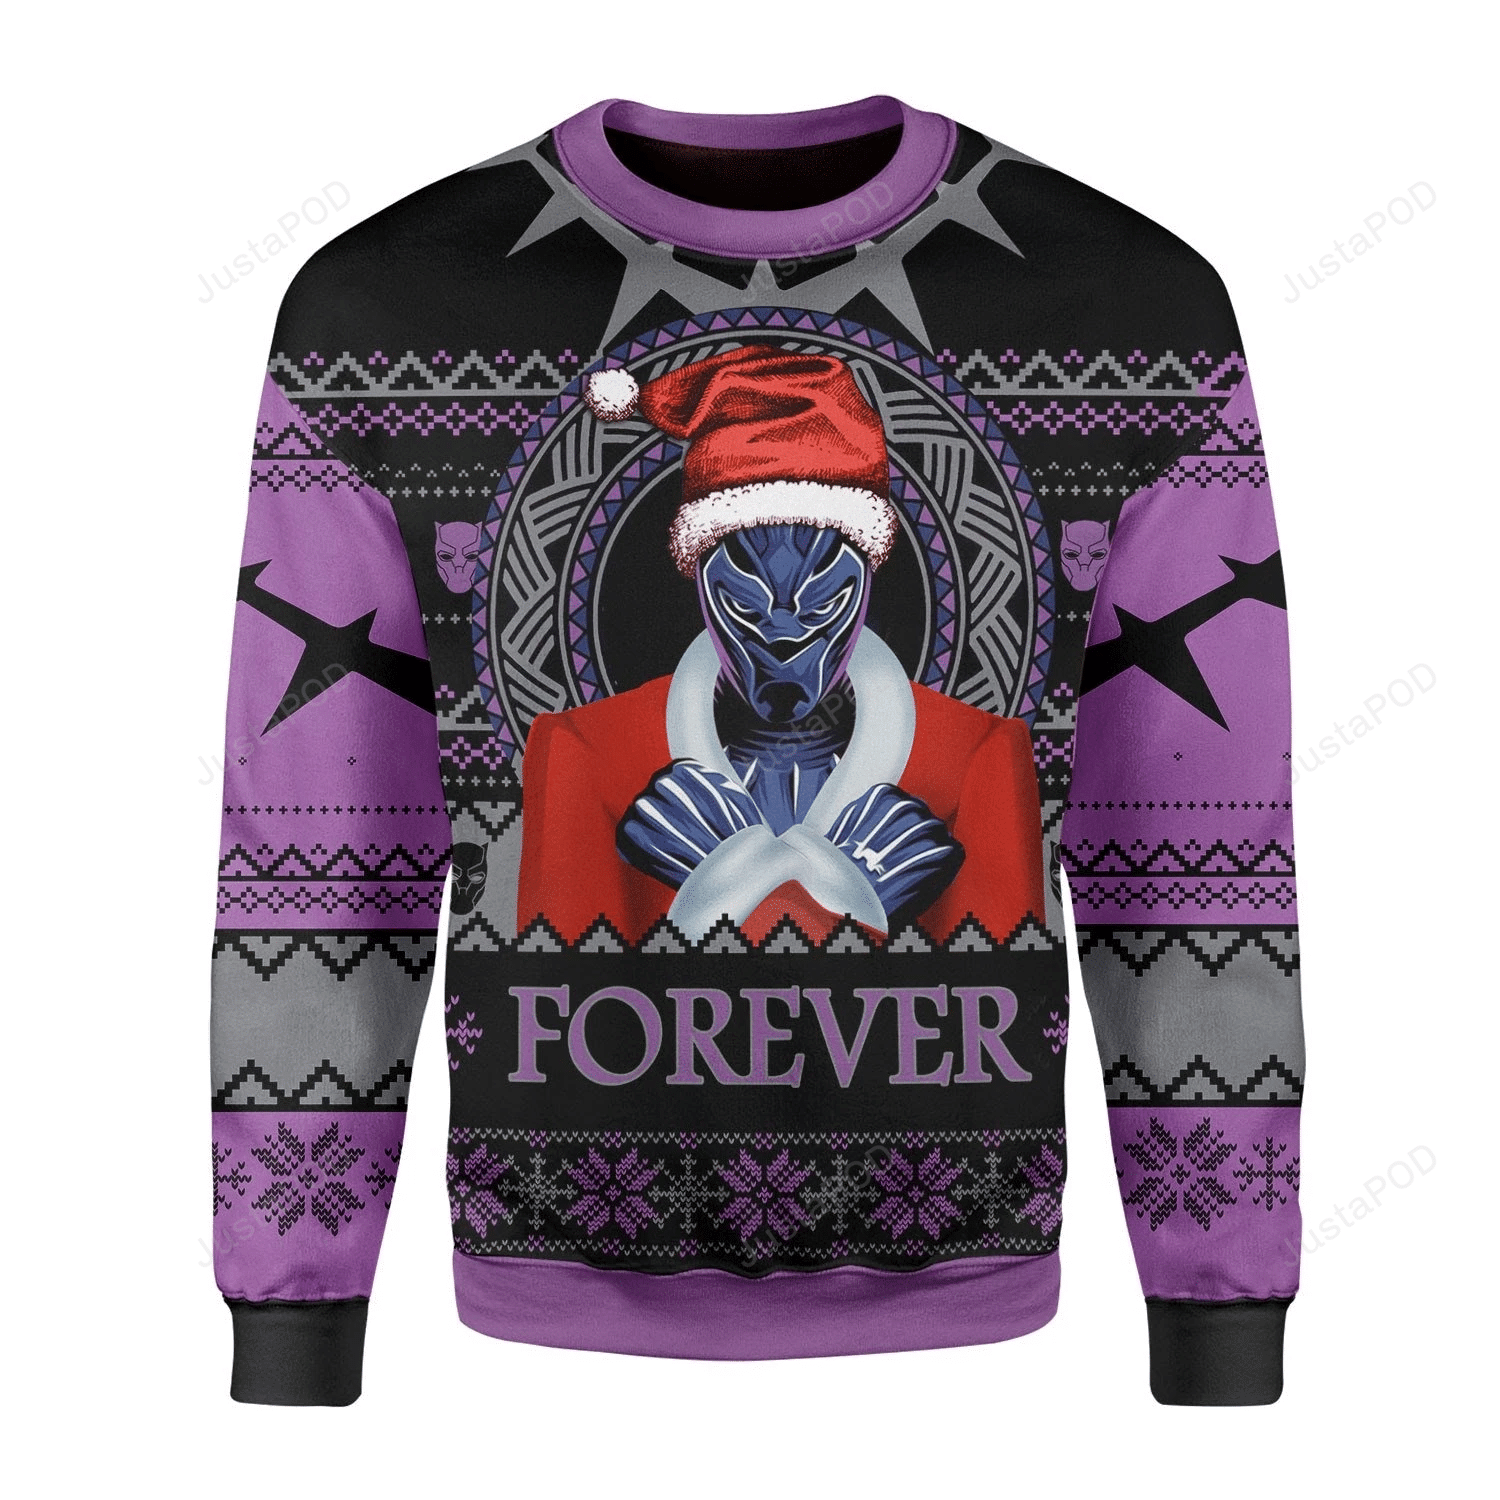 Forever Ugly Christmas Sweater All Over Print Sweatshirt Ugly Sweater